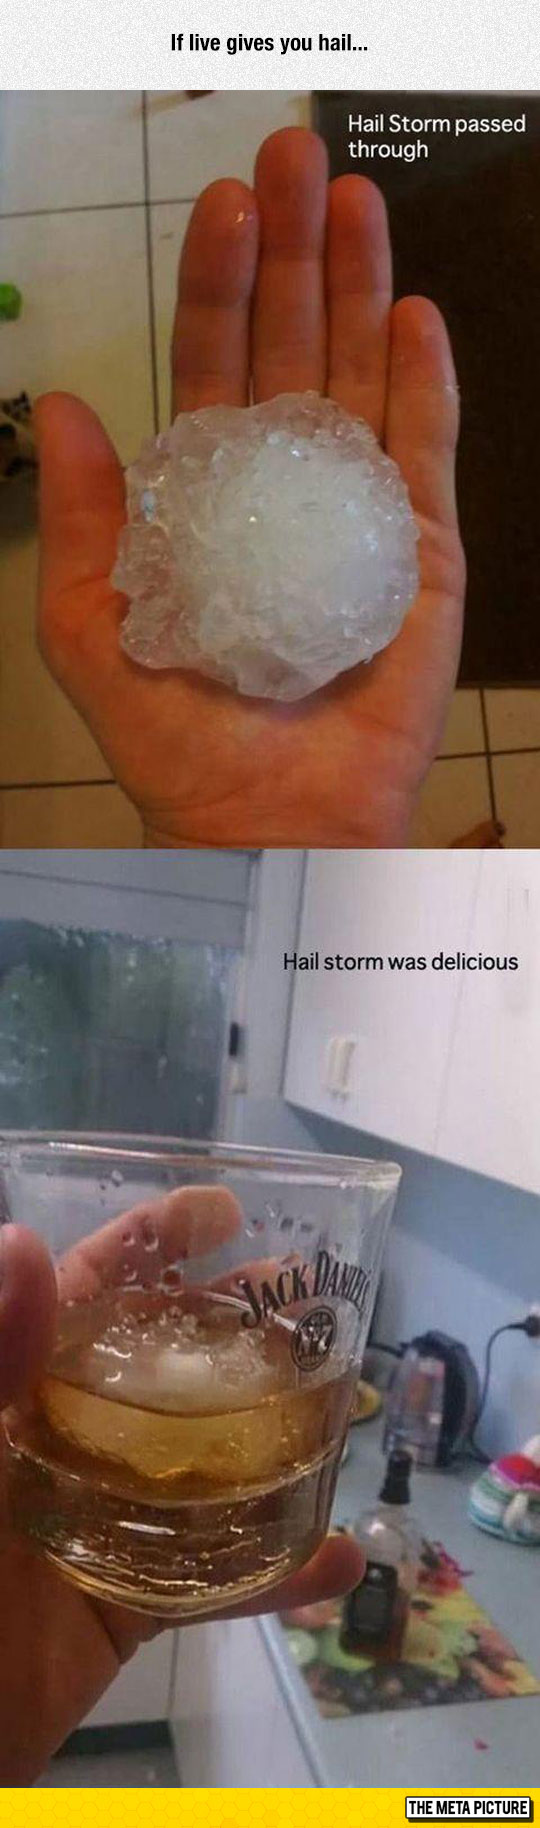 When Life Gives You Hail